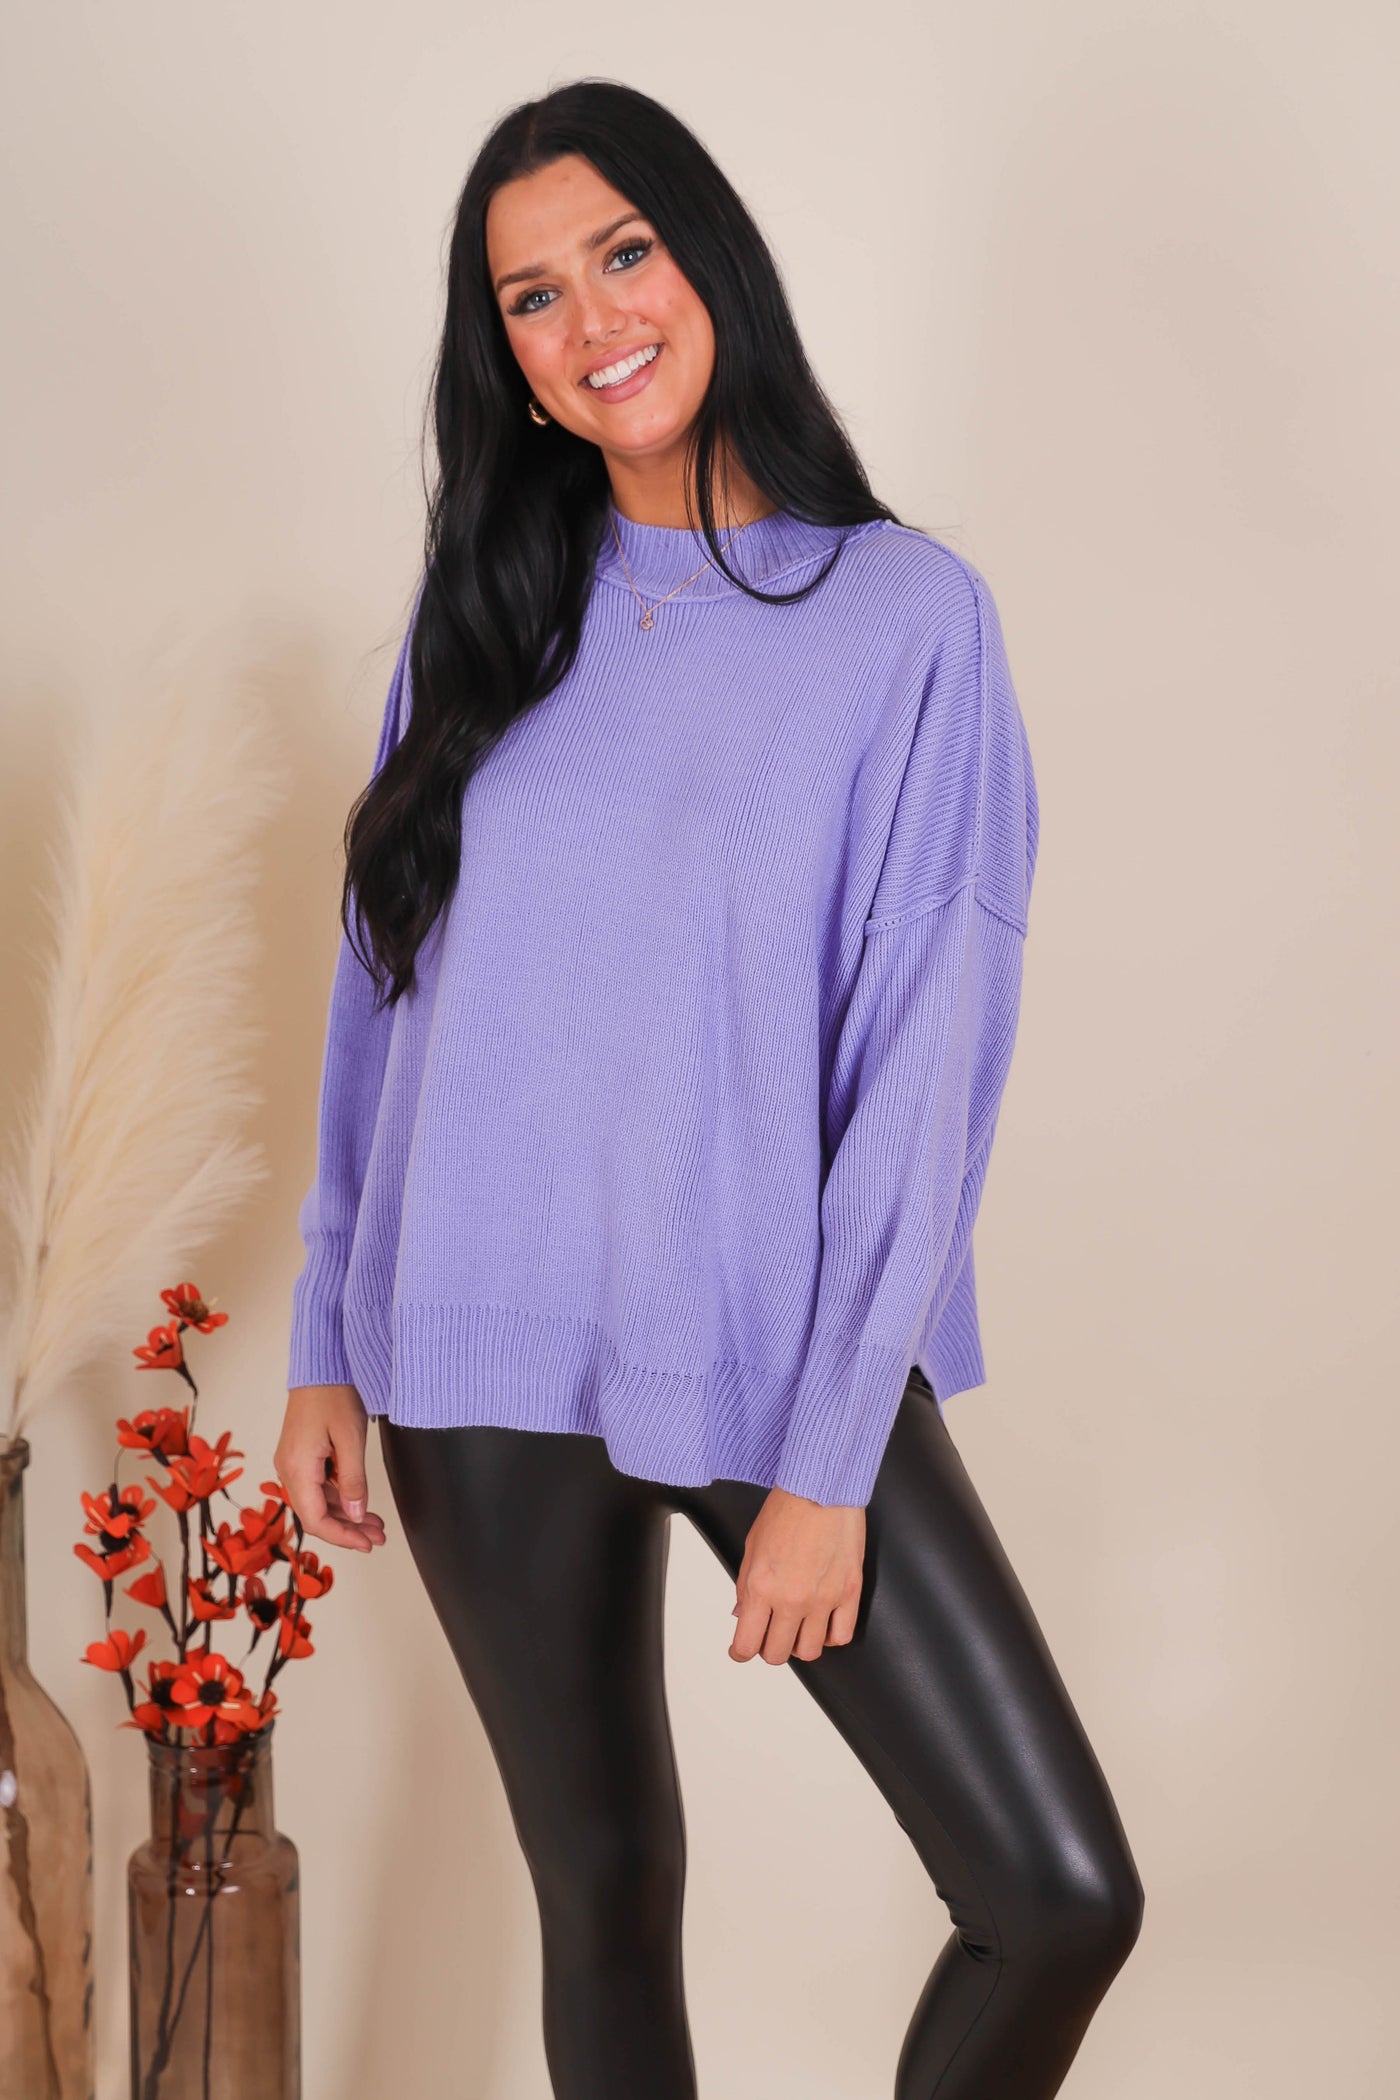 Women's Oversized Sweater- Violet Sweater- Sweater For Leggings- Free People Sweater Dupe